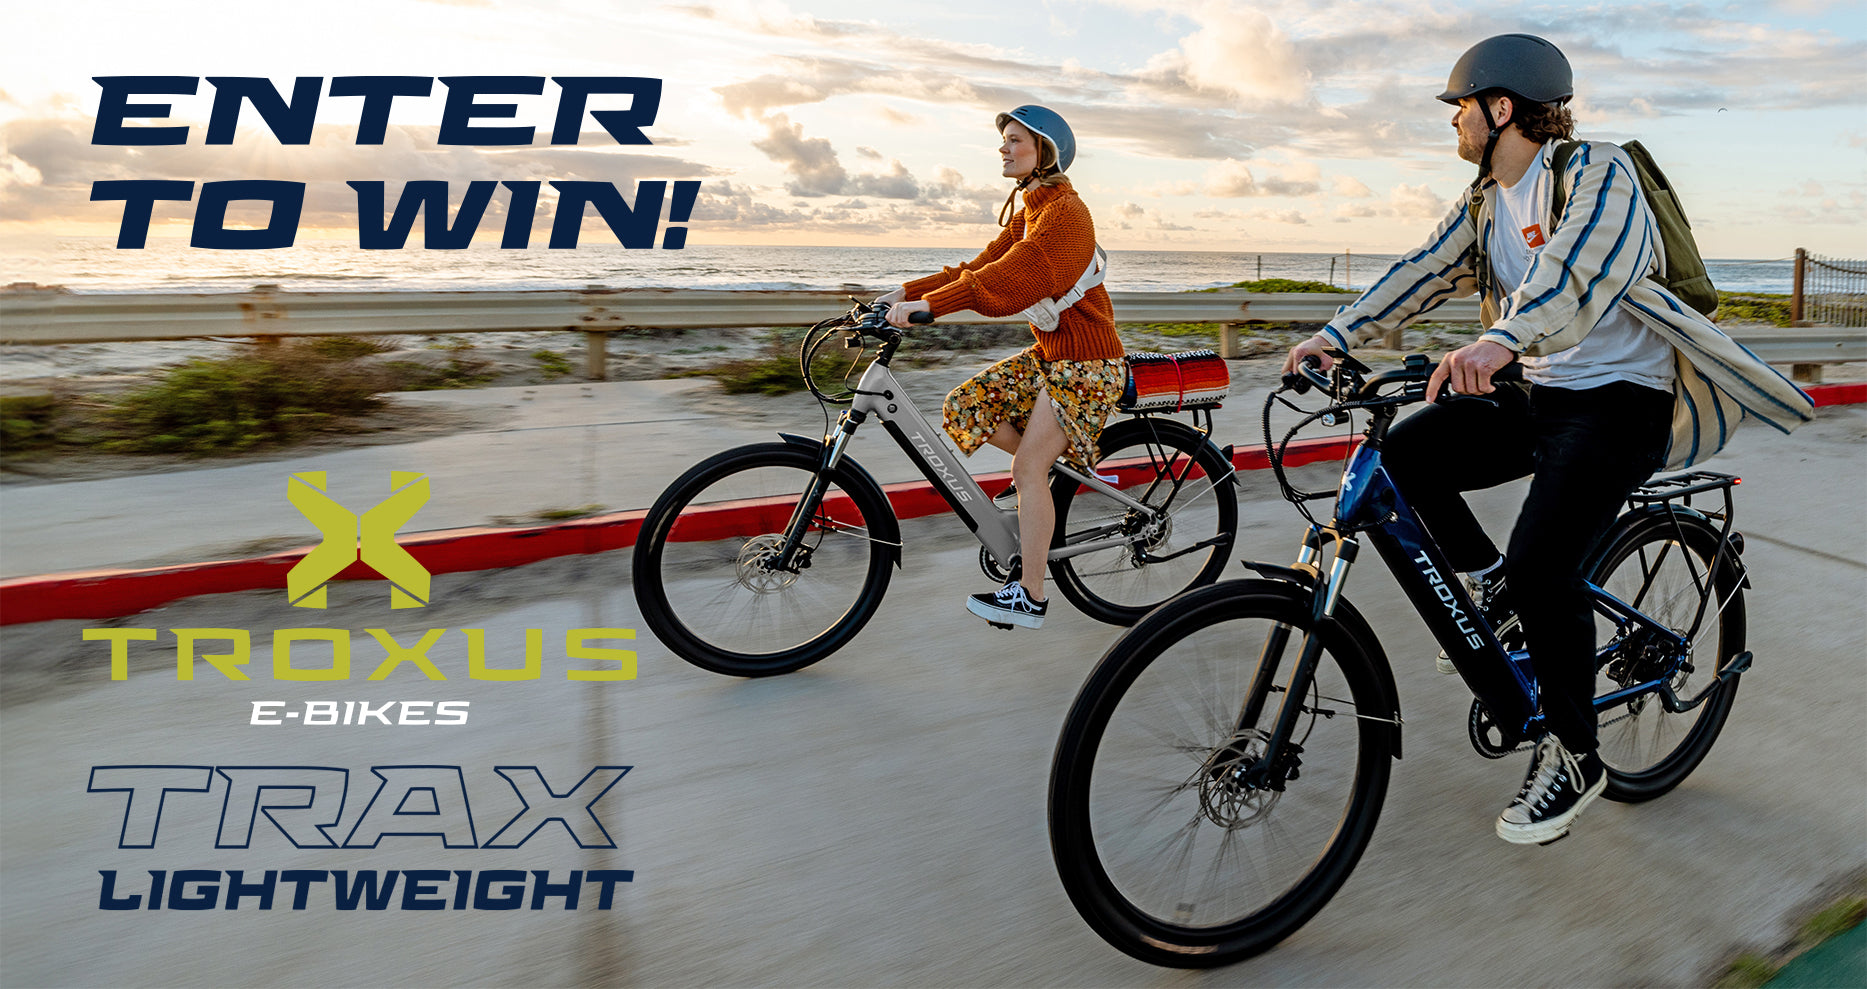 Trax Lightweight Giveaway!